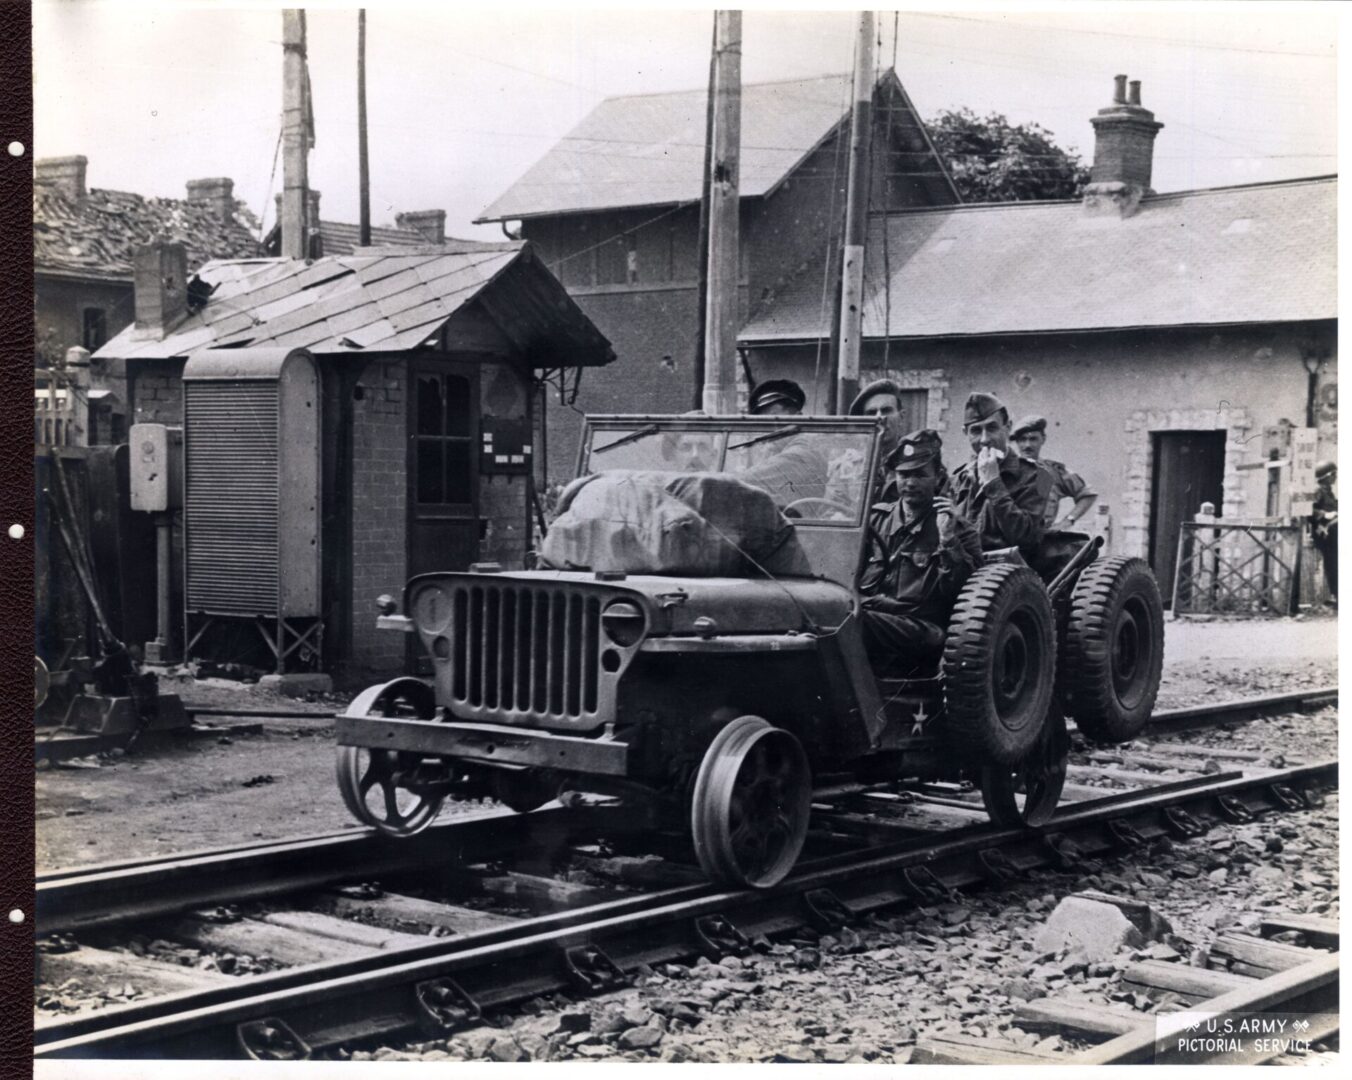 Soldiers ride a jeep altered to travel on the railroad